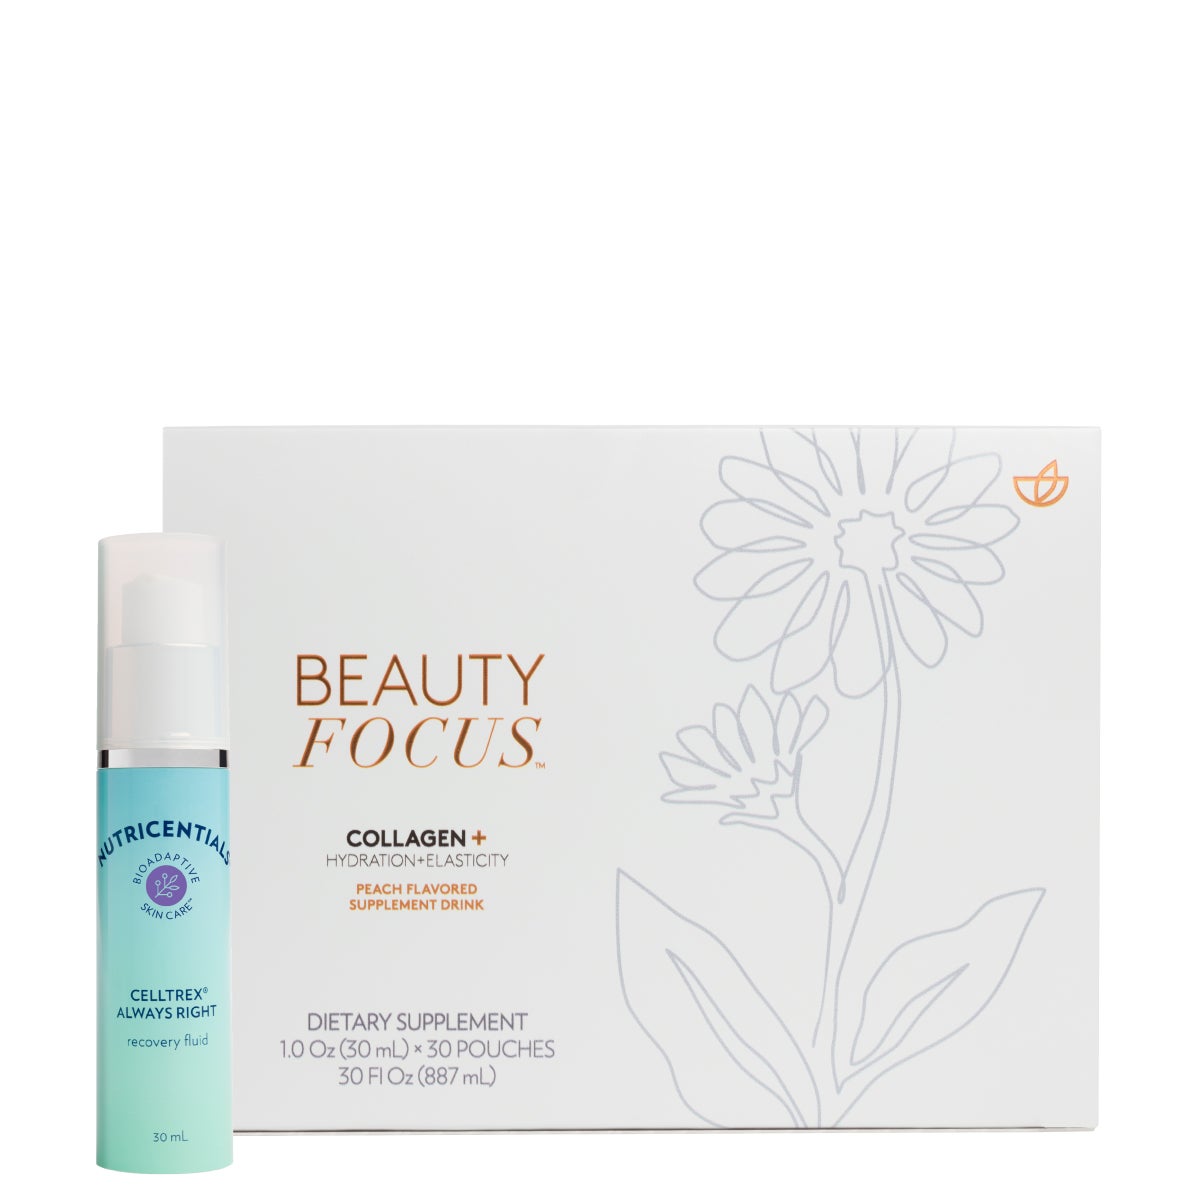 Beauty Focus™ Collagen + Celltrex Always Right Recovery Fluid Subscription